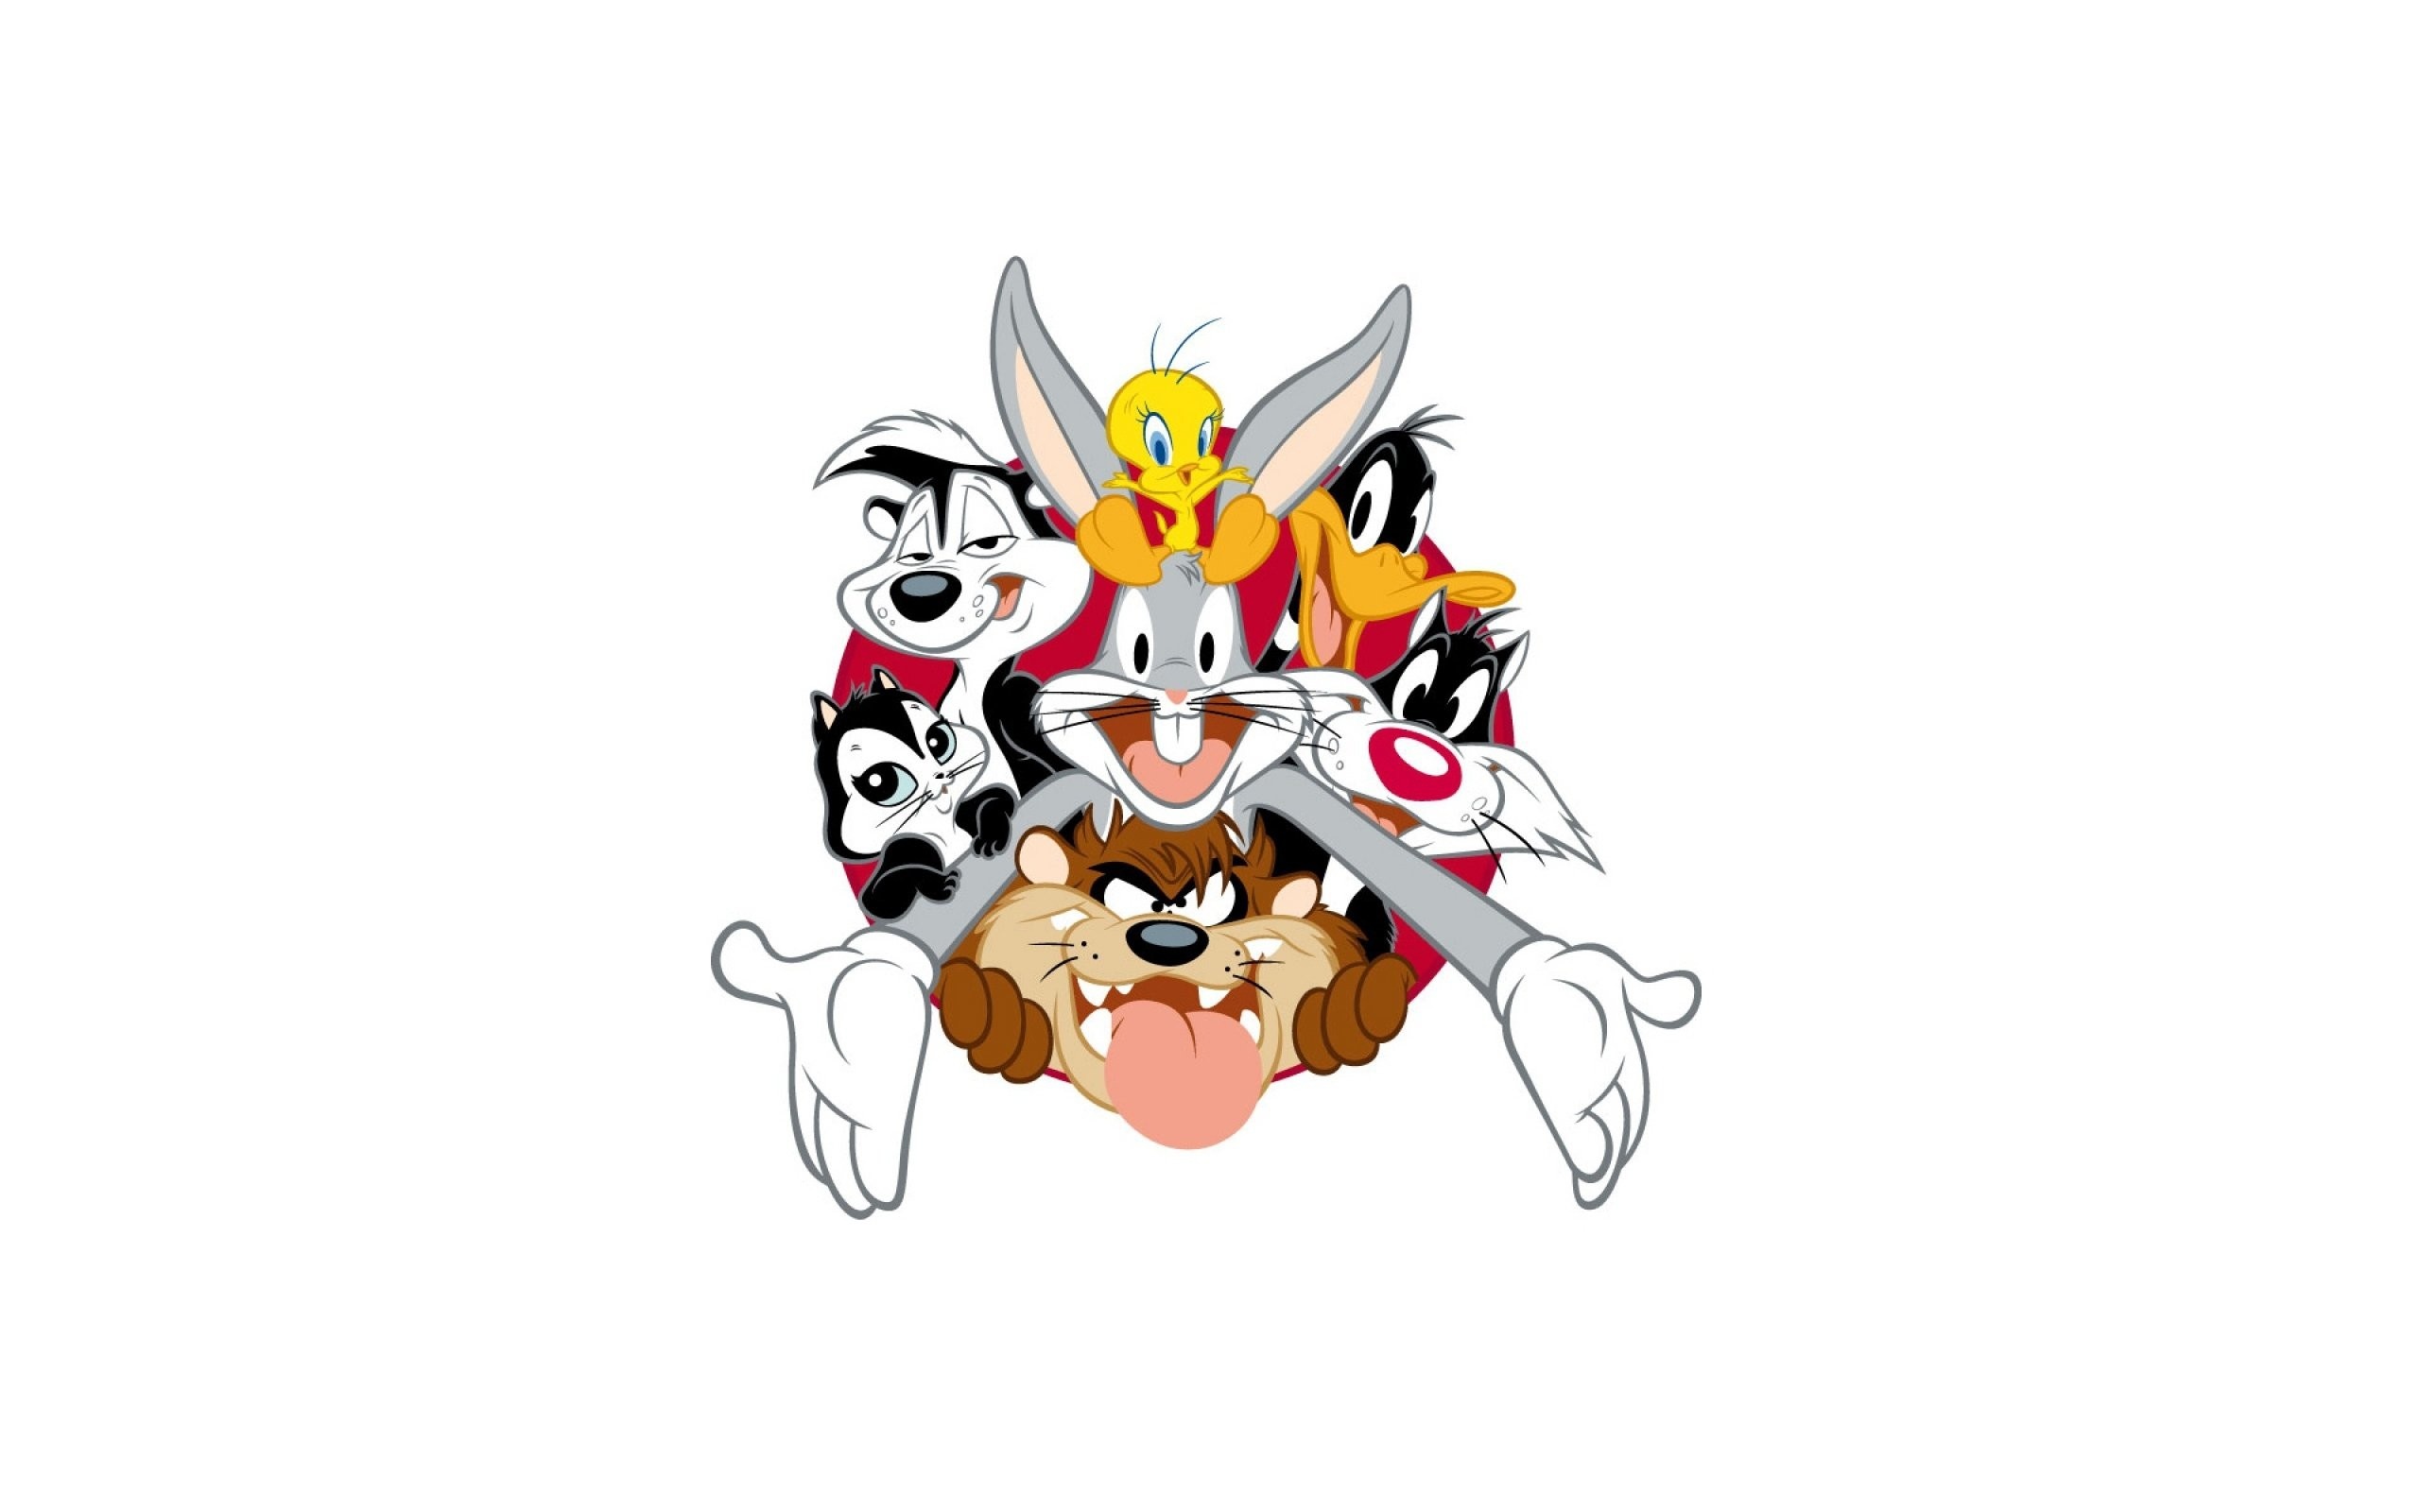 Looney Tunes, Cartoon characters, Colorful wallpapers, Animated series, 2560x1600 HD Desktop